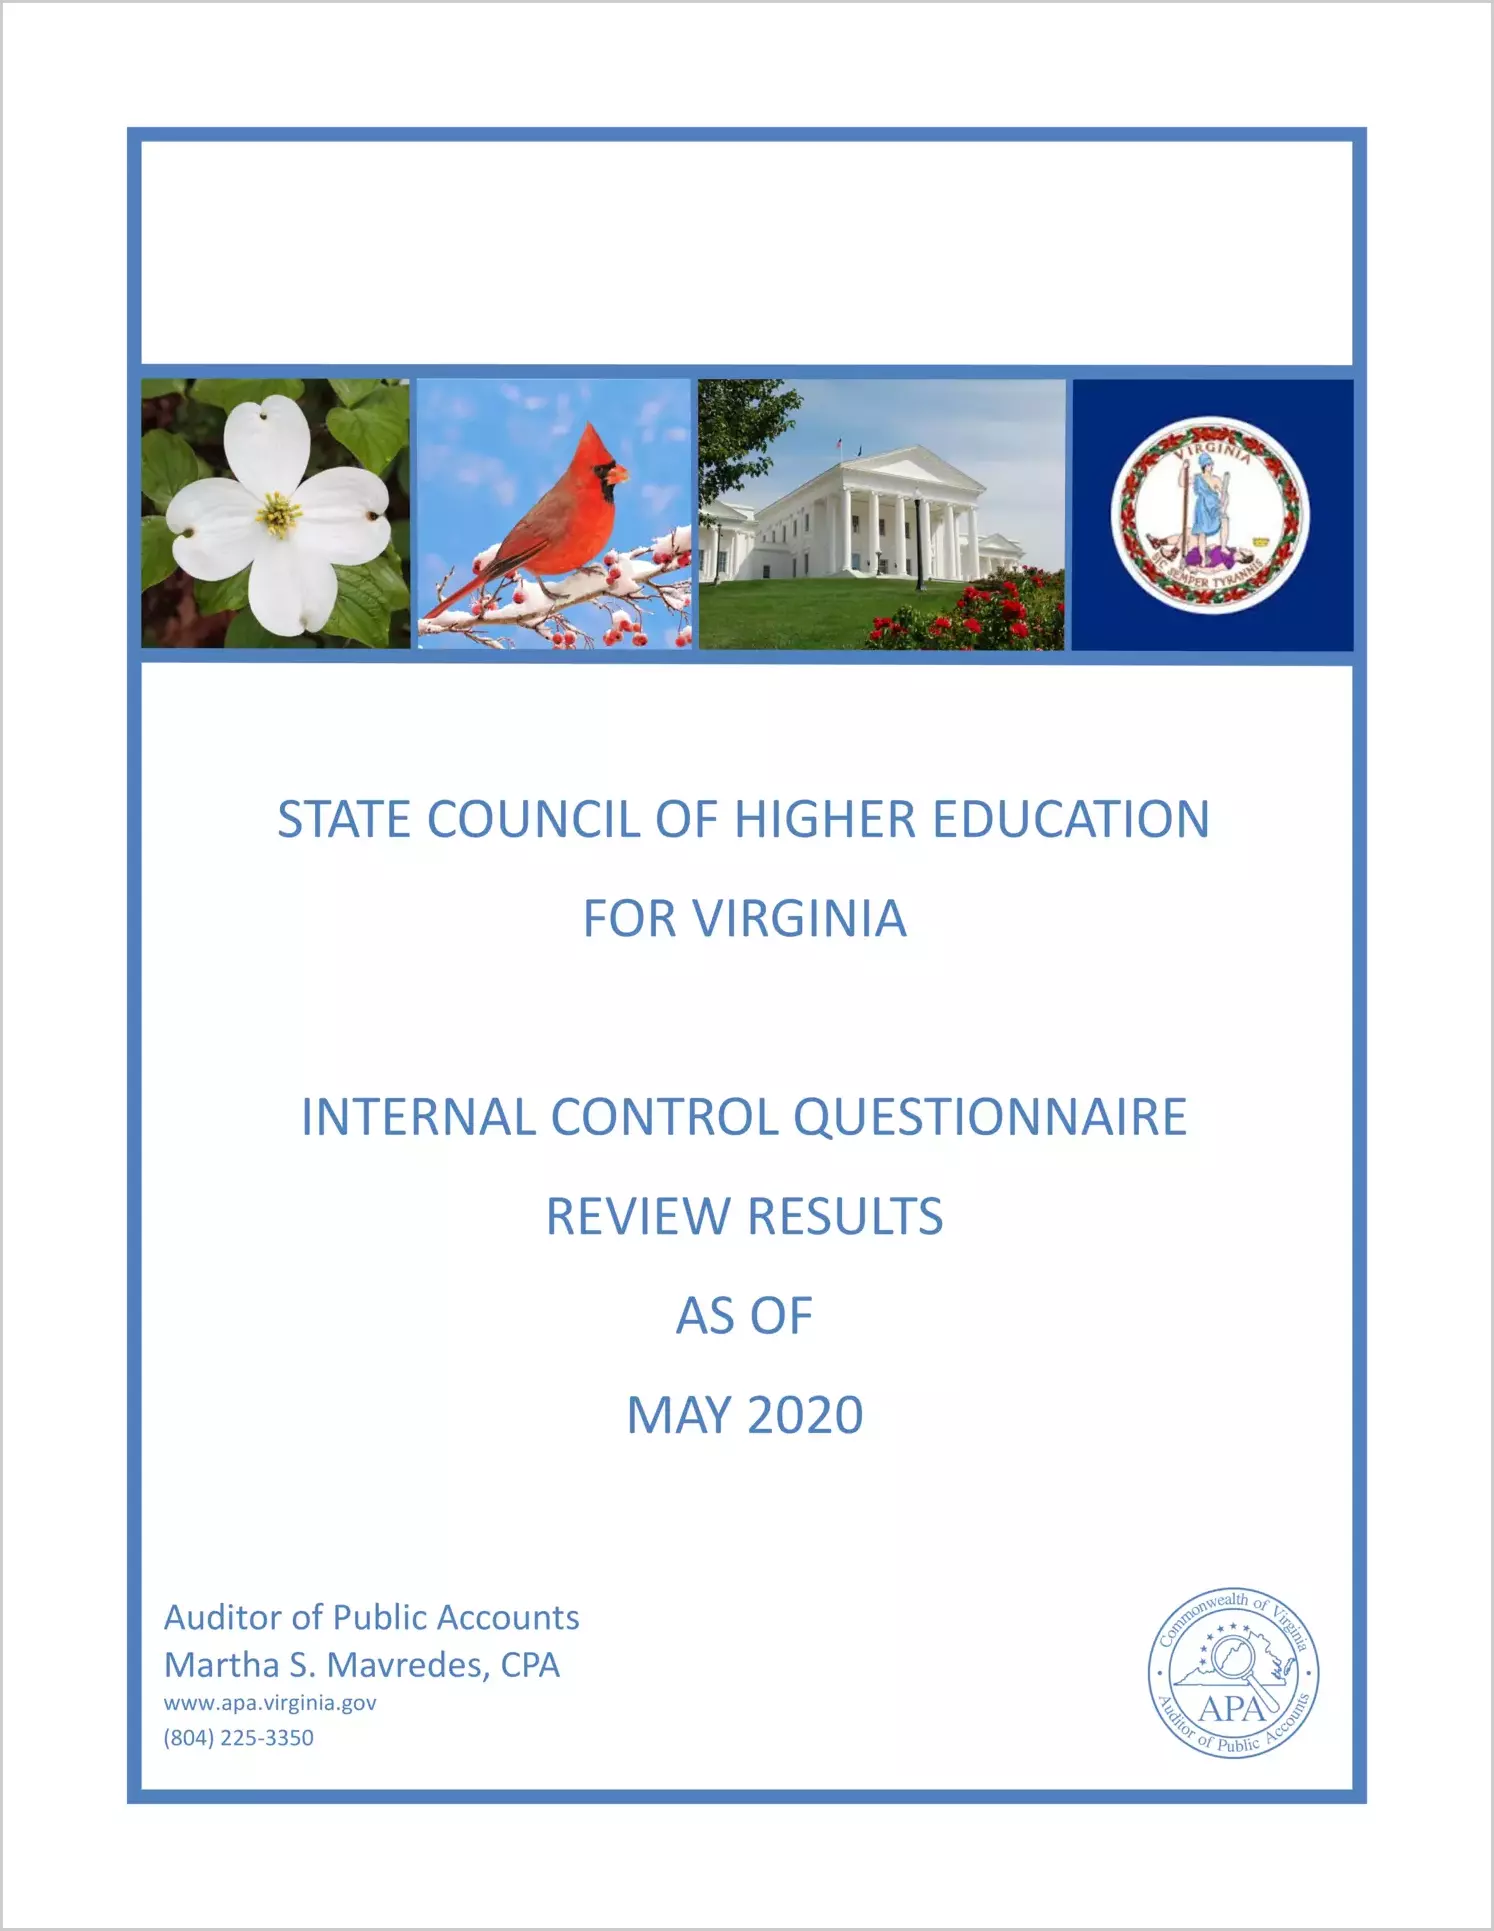 State Council of Higher Education for Virginia Internal Control Questionnaire Review Results as of May 2020